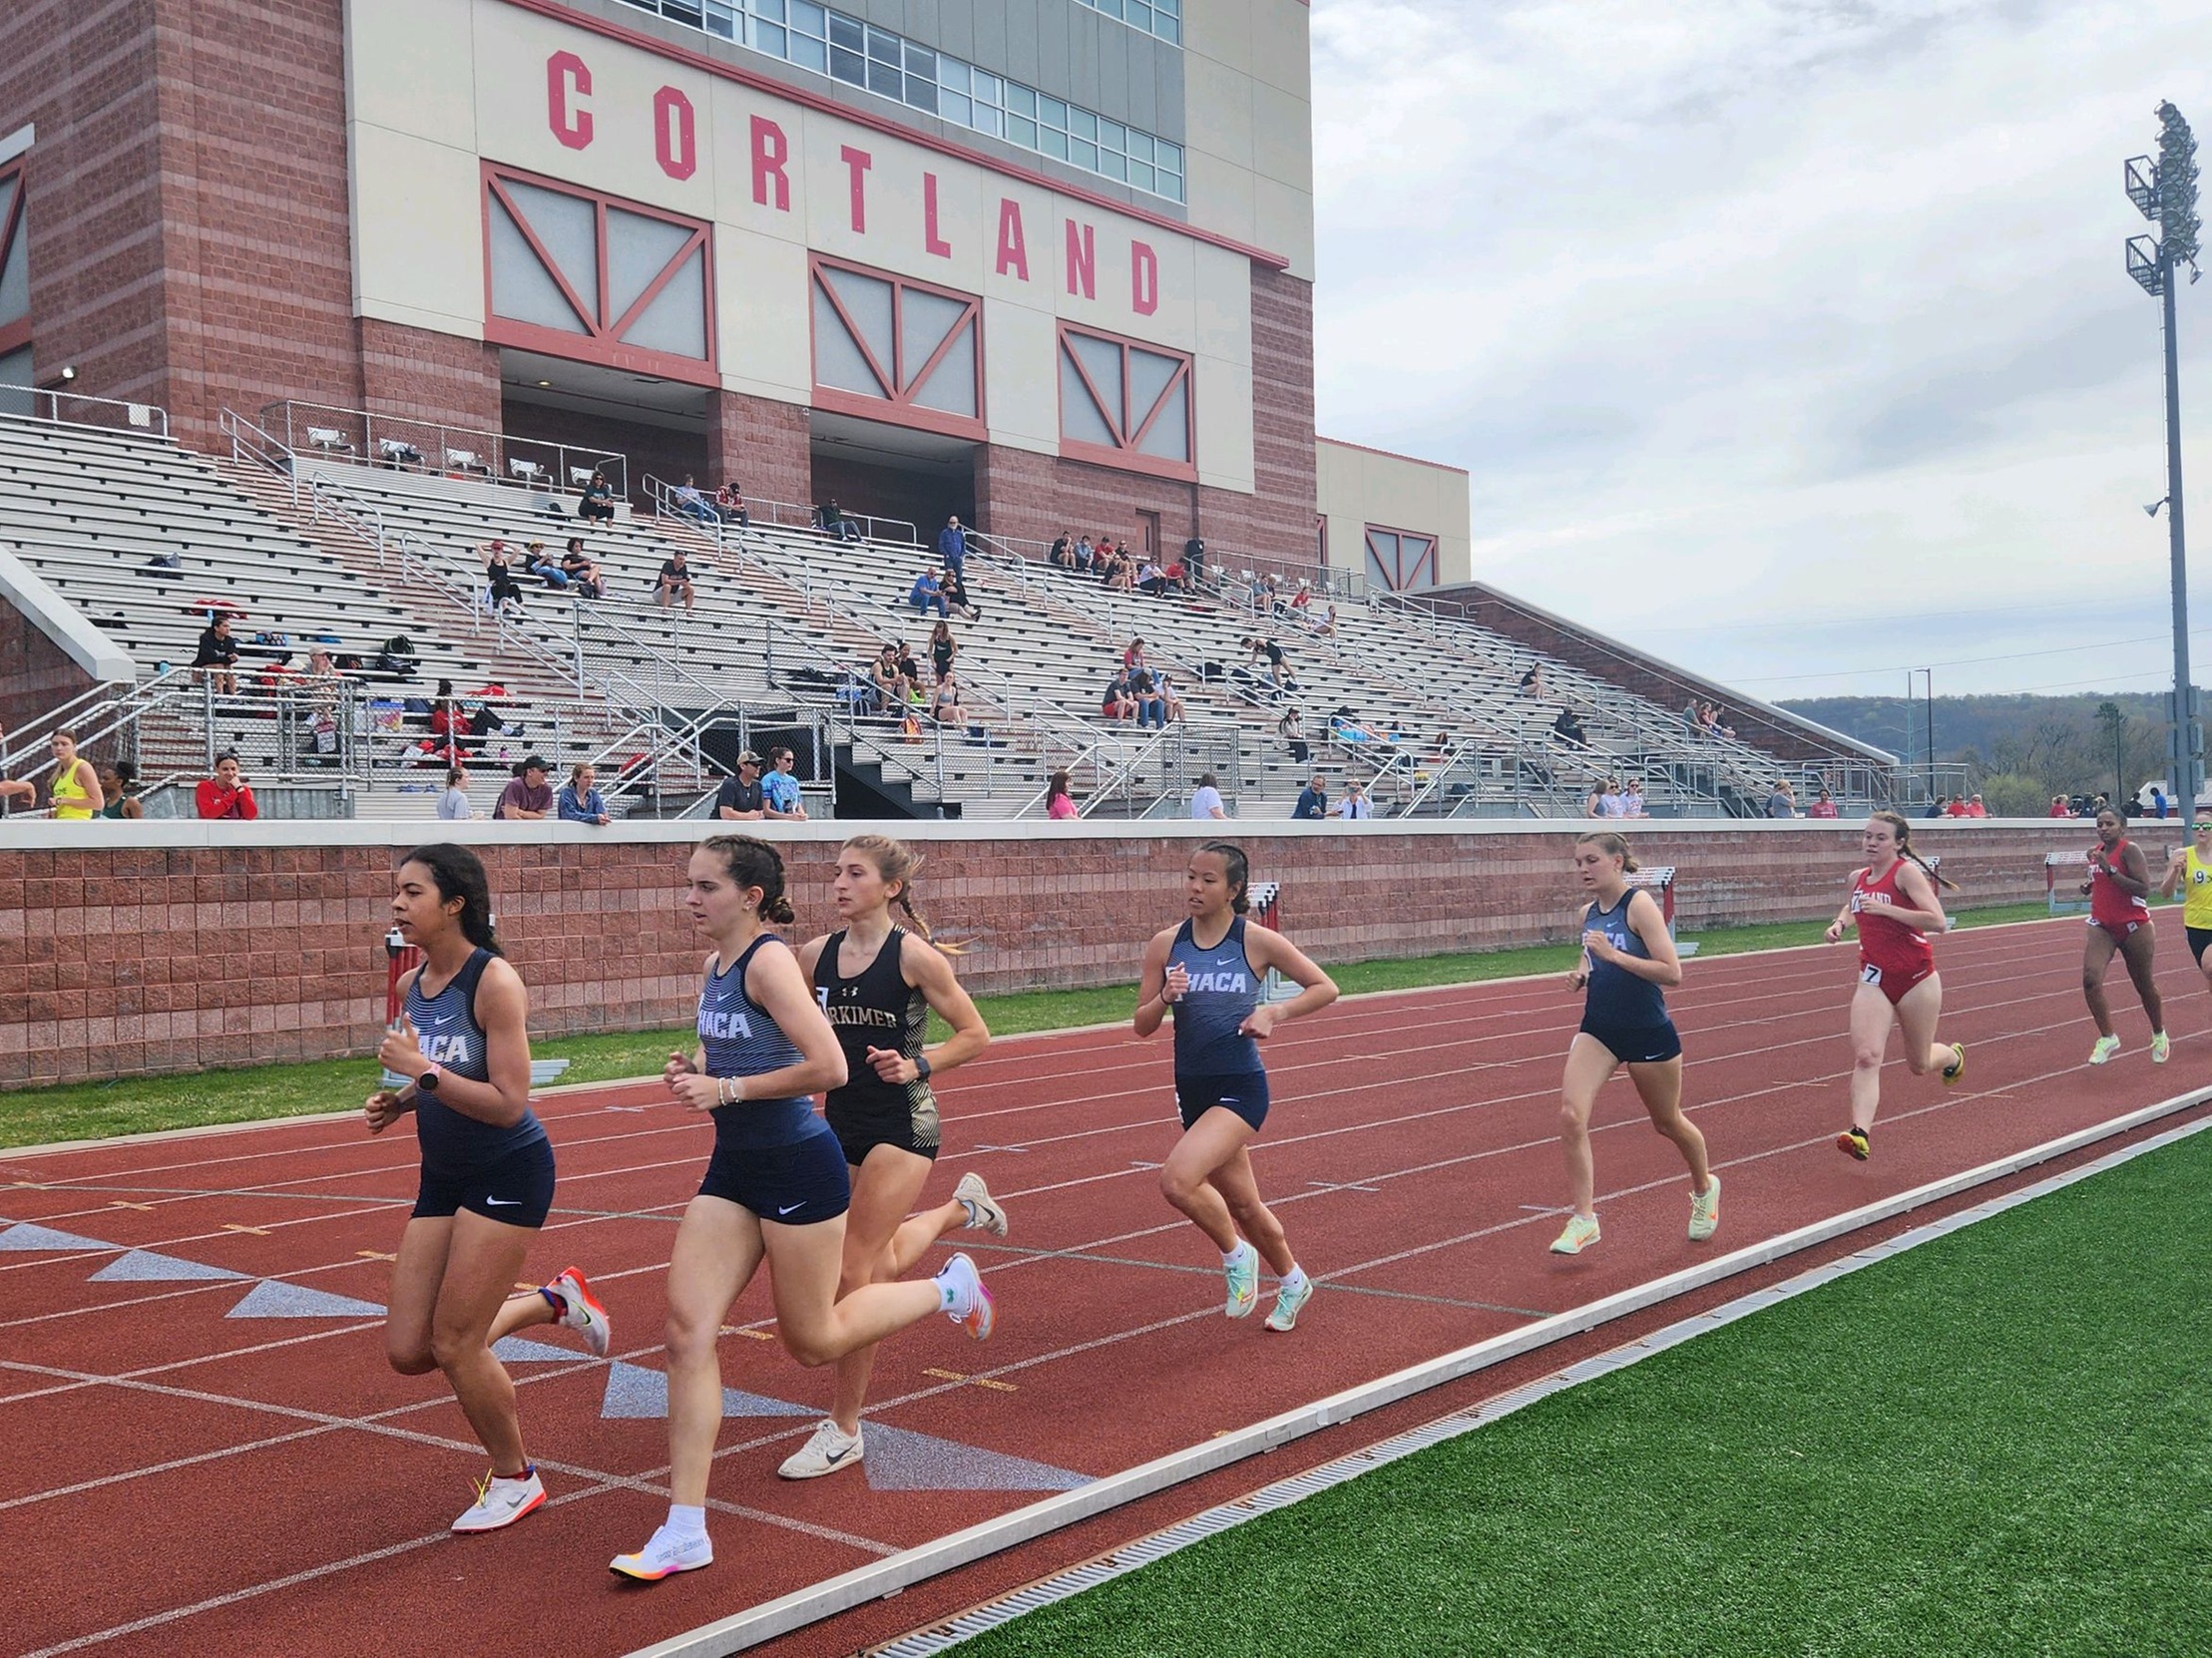 The Generals competed at SUNY Cortland in the &ldquo;Upstate Alternative Meet&rdquo;